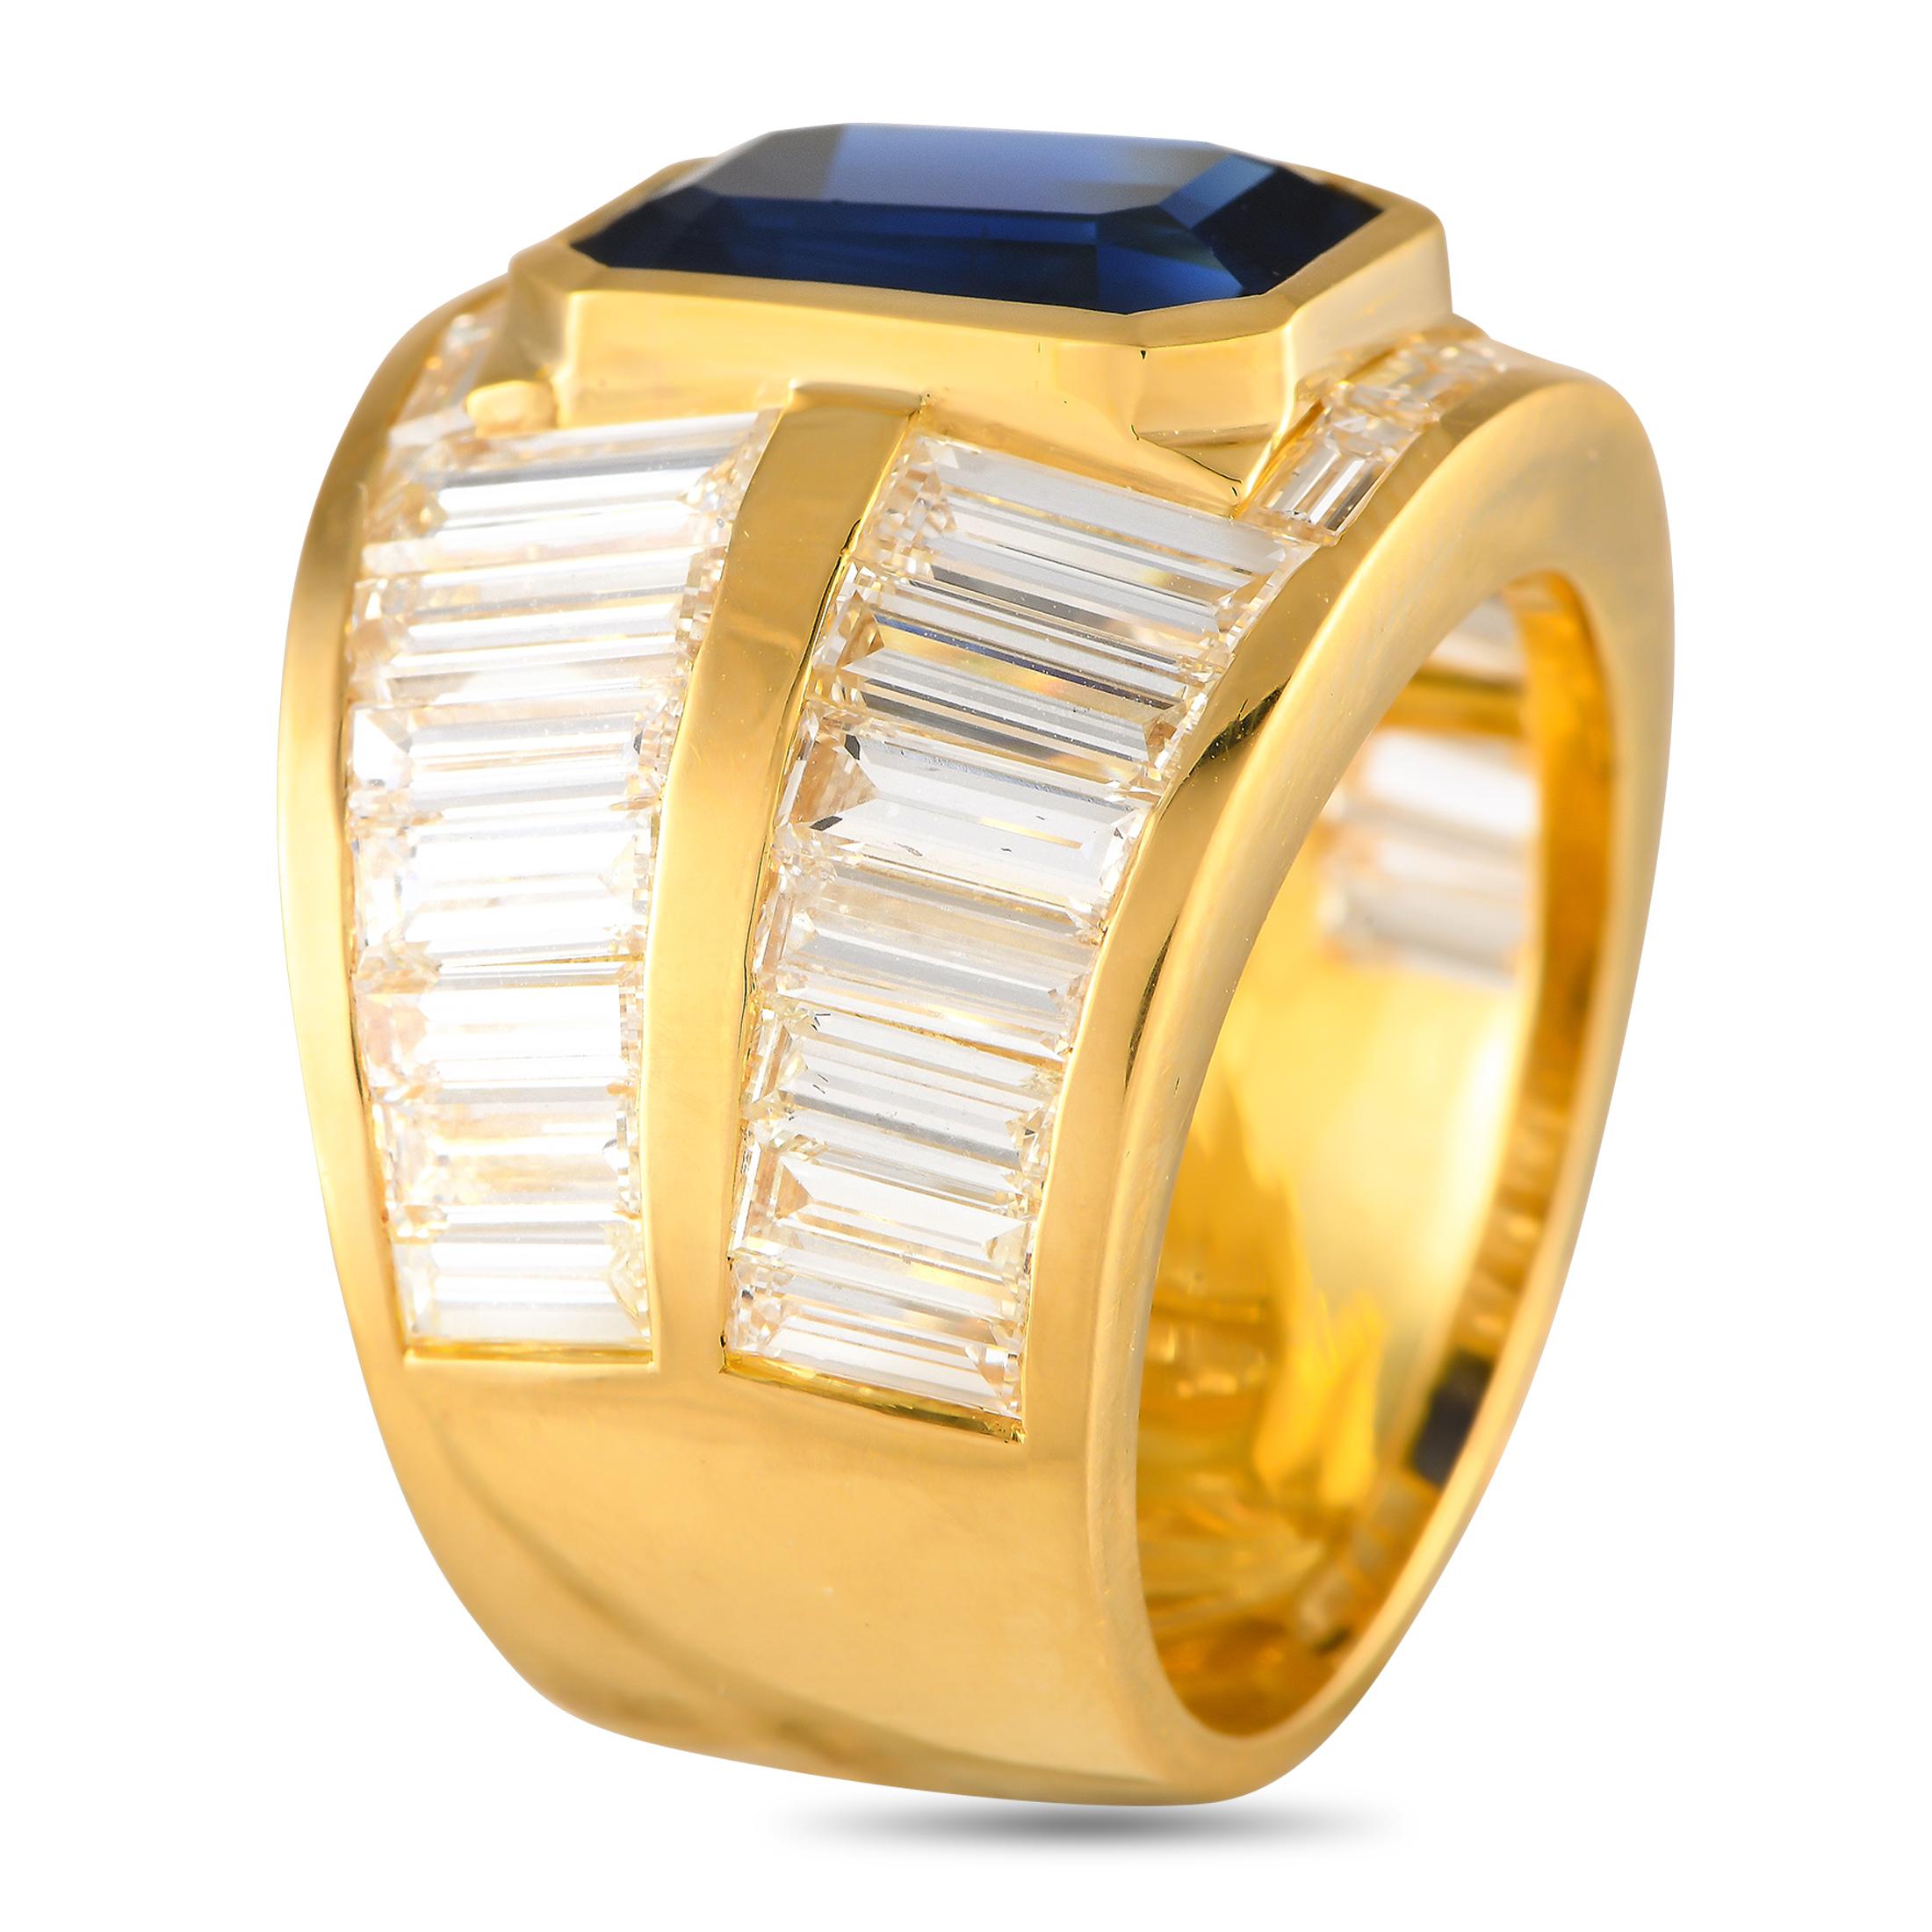 With a wide band and a channel setting, here's the ring for the bold and daring. This piece features a yellow gold band designed with two tracks or channels of tapered baguette diamonds. Adding a pop of color to the ring is a mesmerizing blue